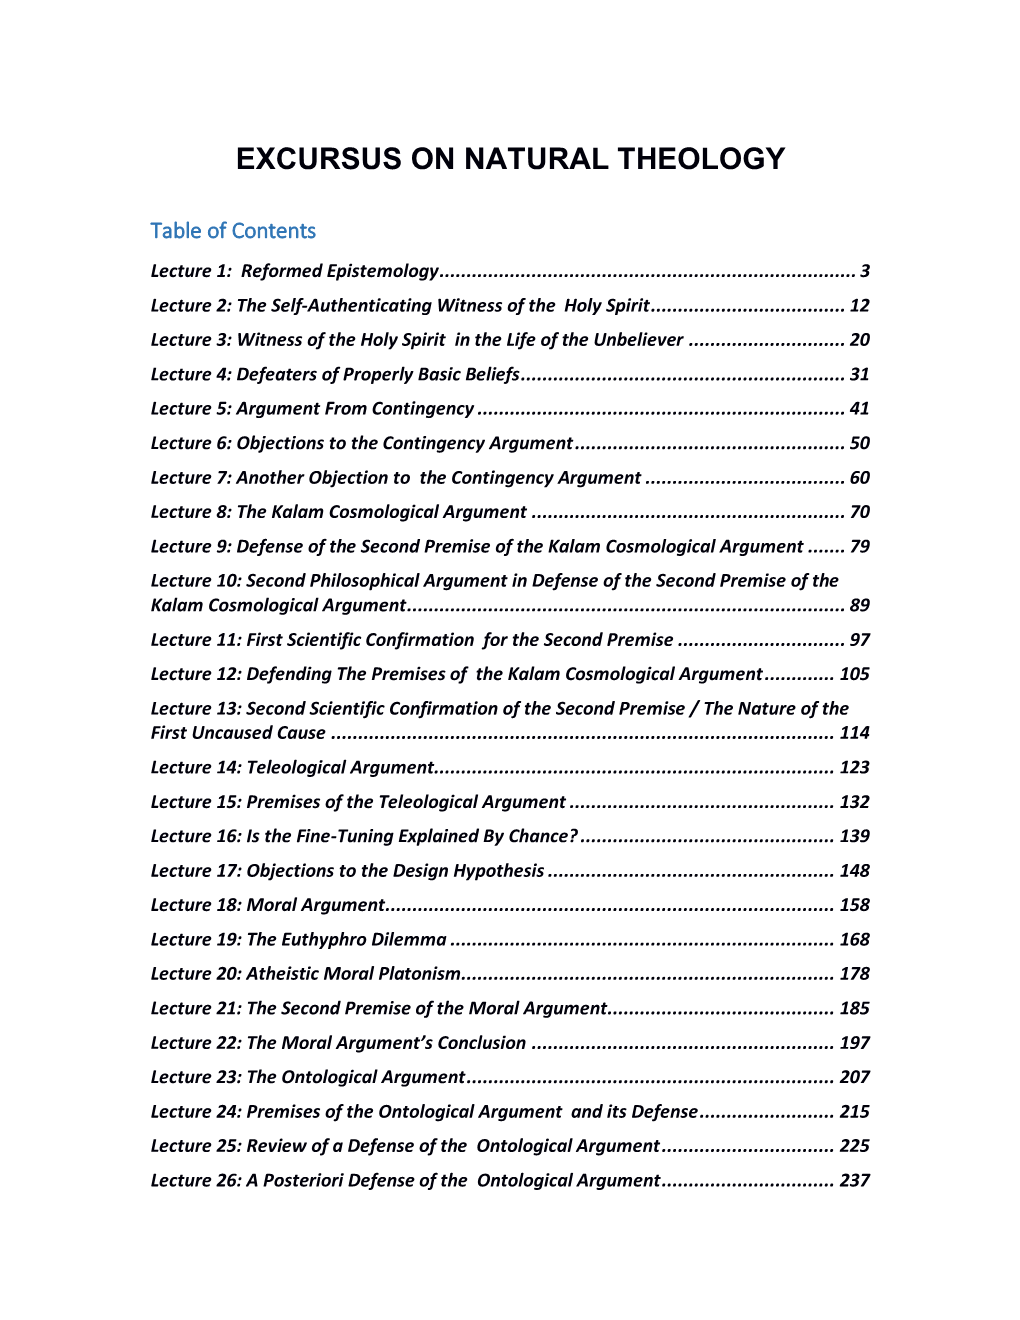 Excursus on Natural Theology